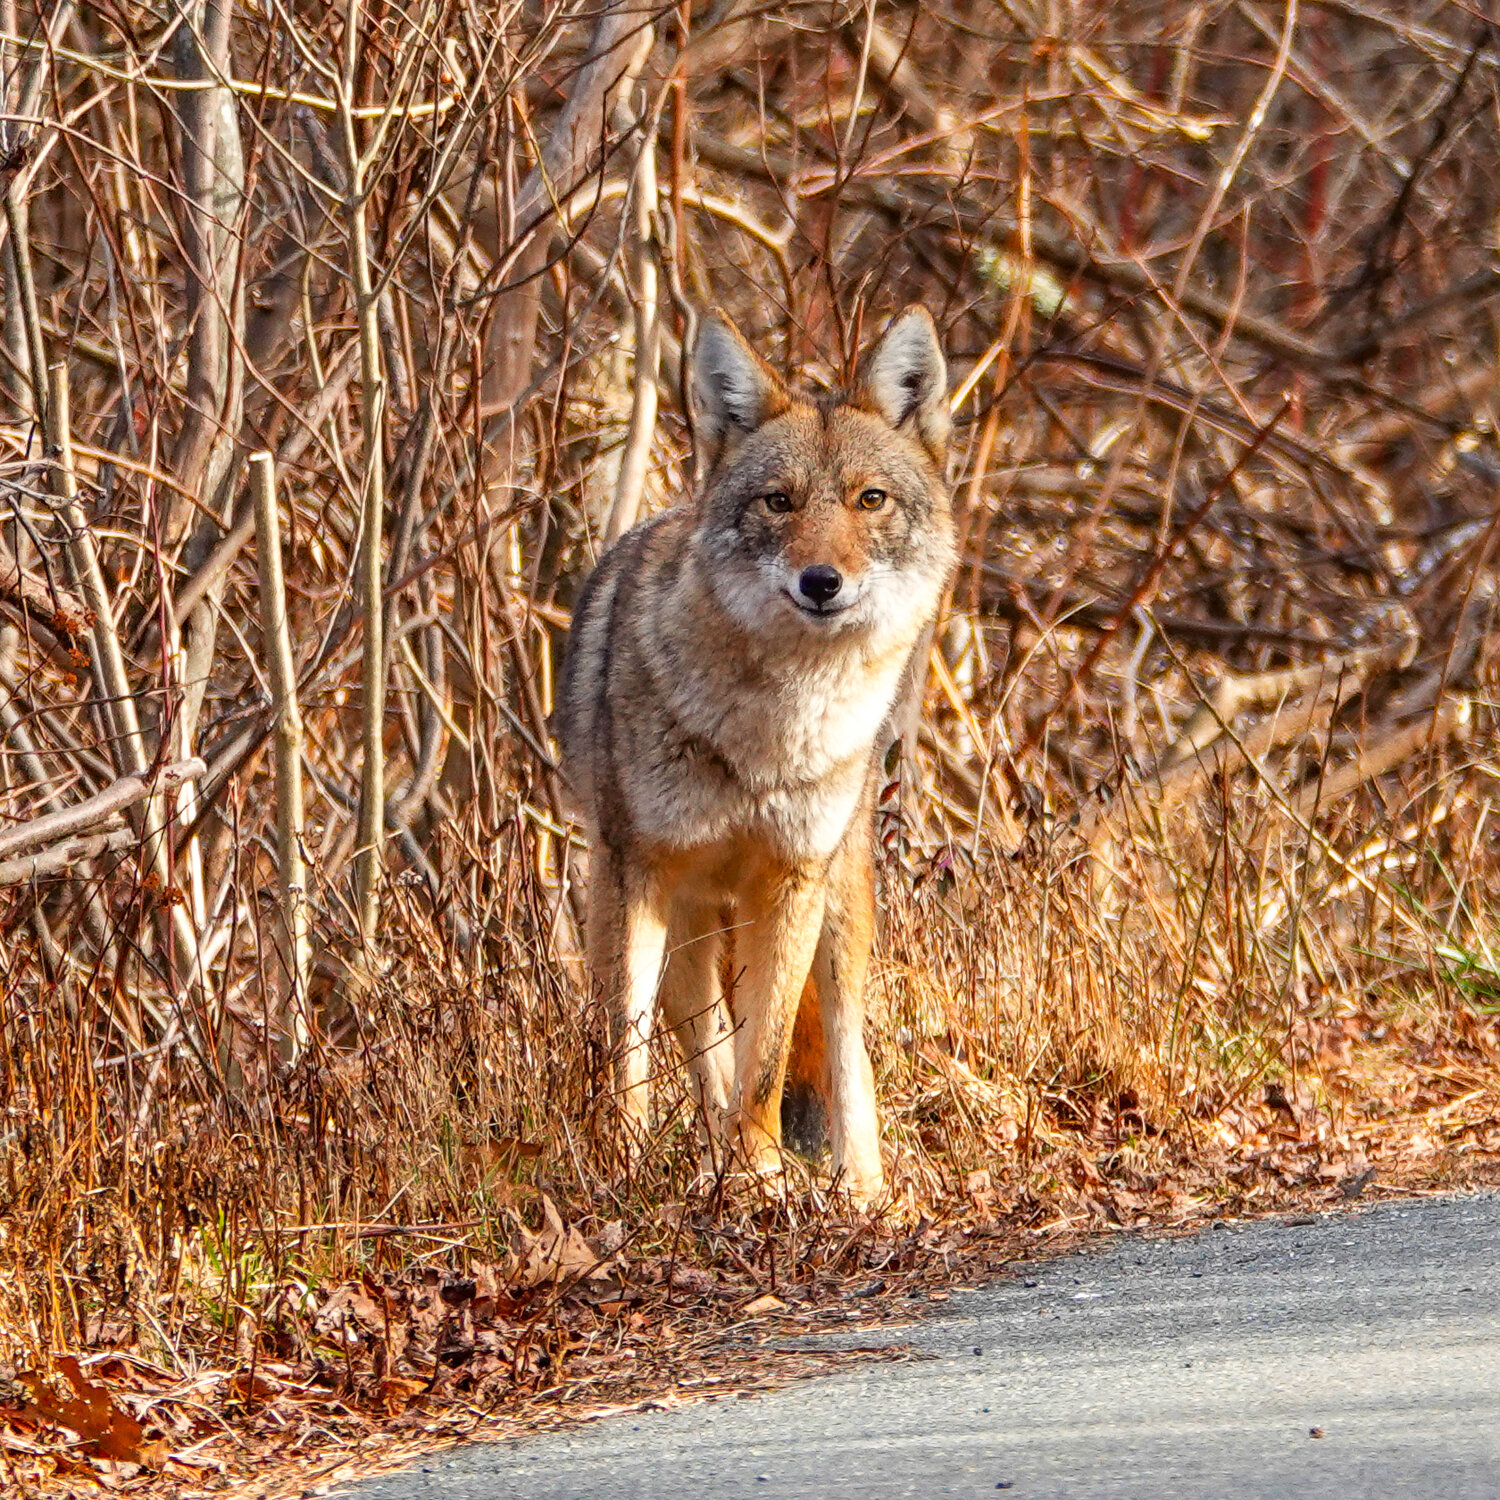 Coyote on Niles Pond Road, Gloucester, in January.